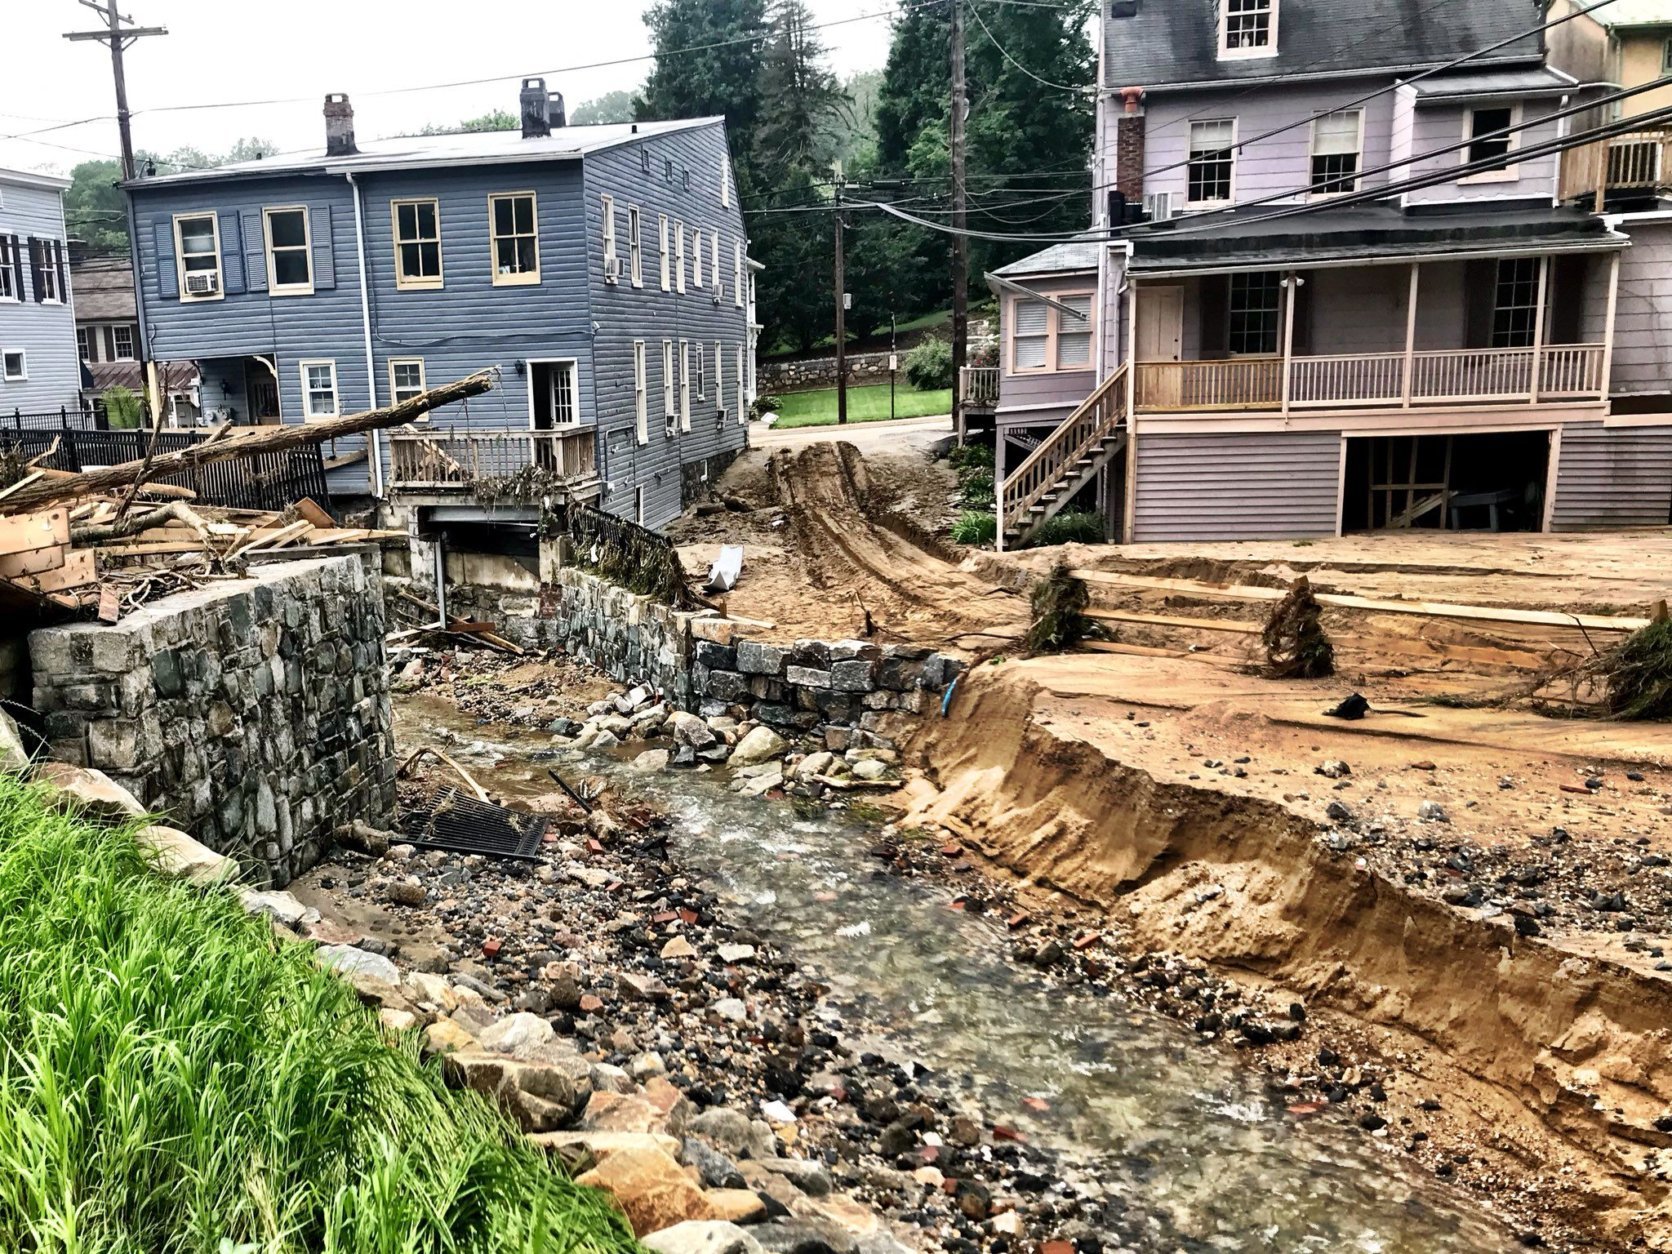 On a normal day, Tiber Creek flows right behind homes and businesses in Ellicott City, Maryland. (WTOP/Neal Augenstein)